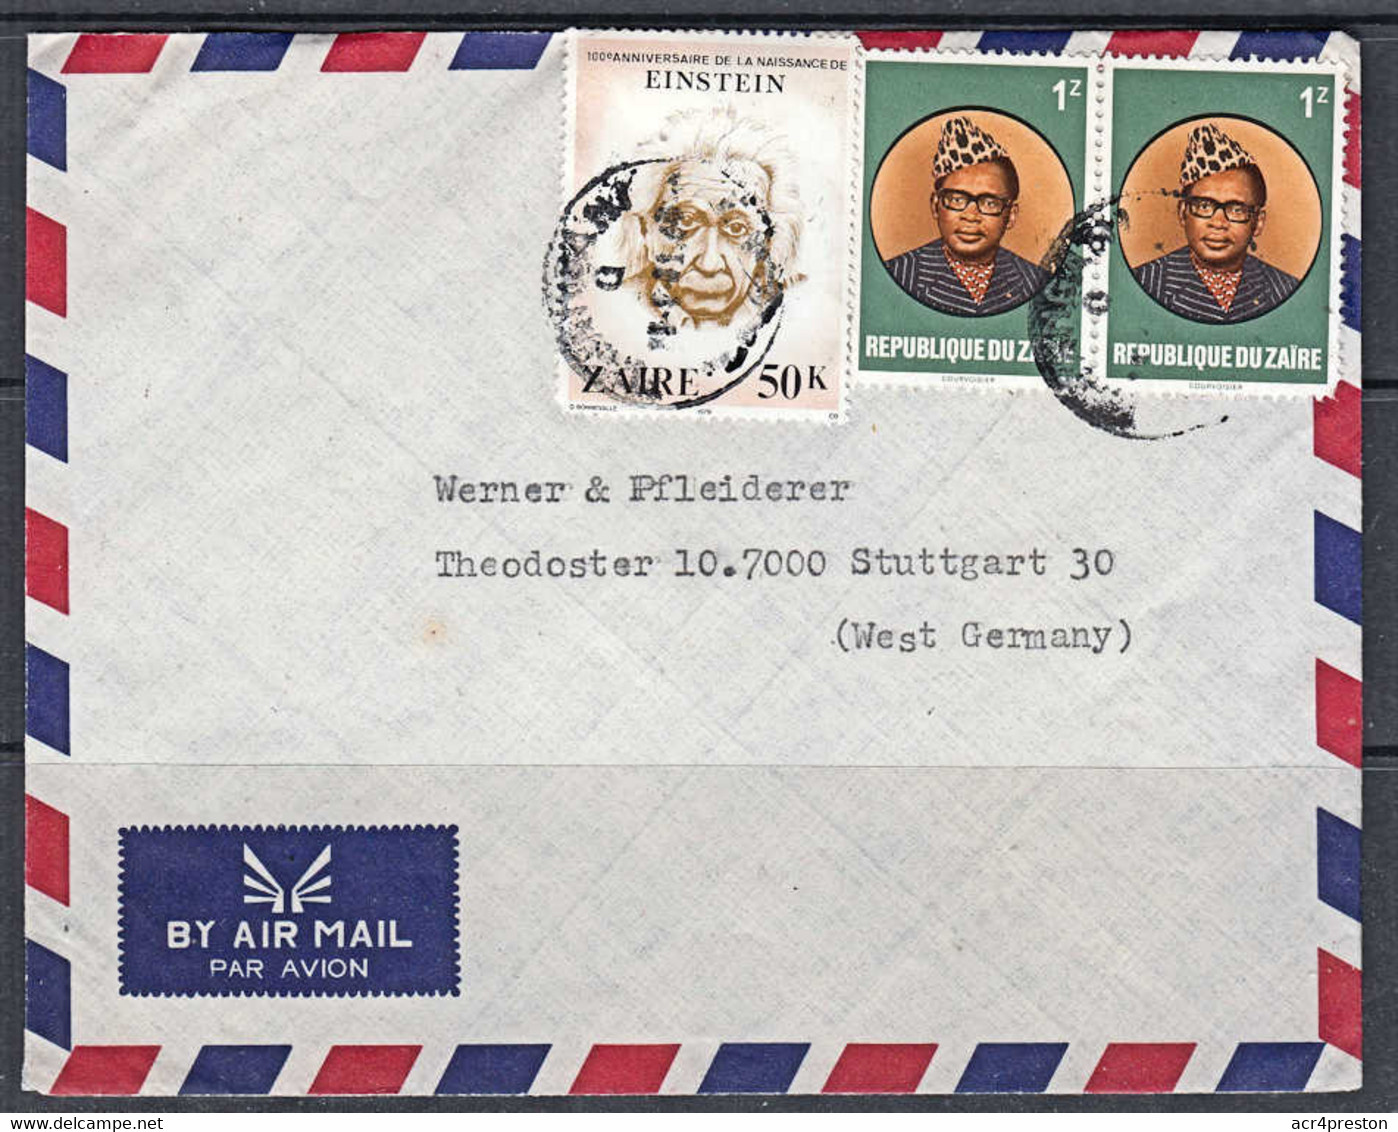 Ca0637  ZAIRE 1981,  Einstein And Mobutu Stamps On Kisangani Cover To Germany - Used Stamps